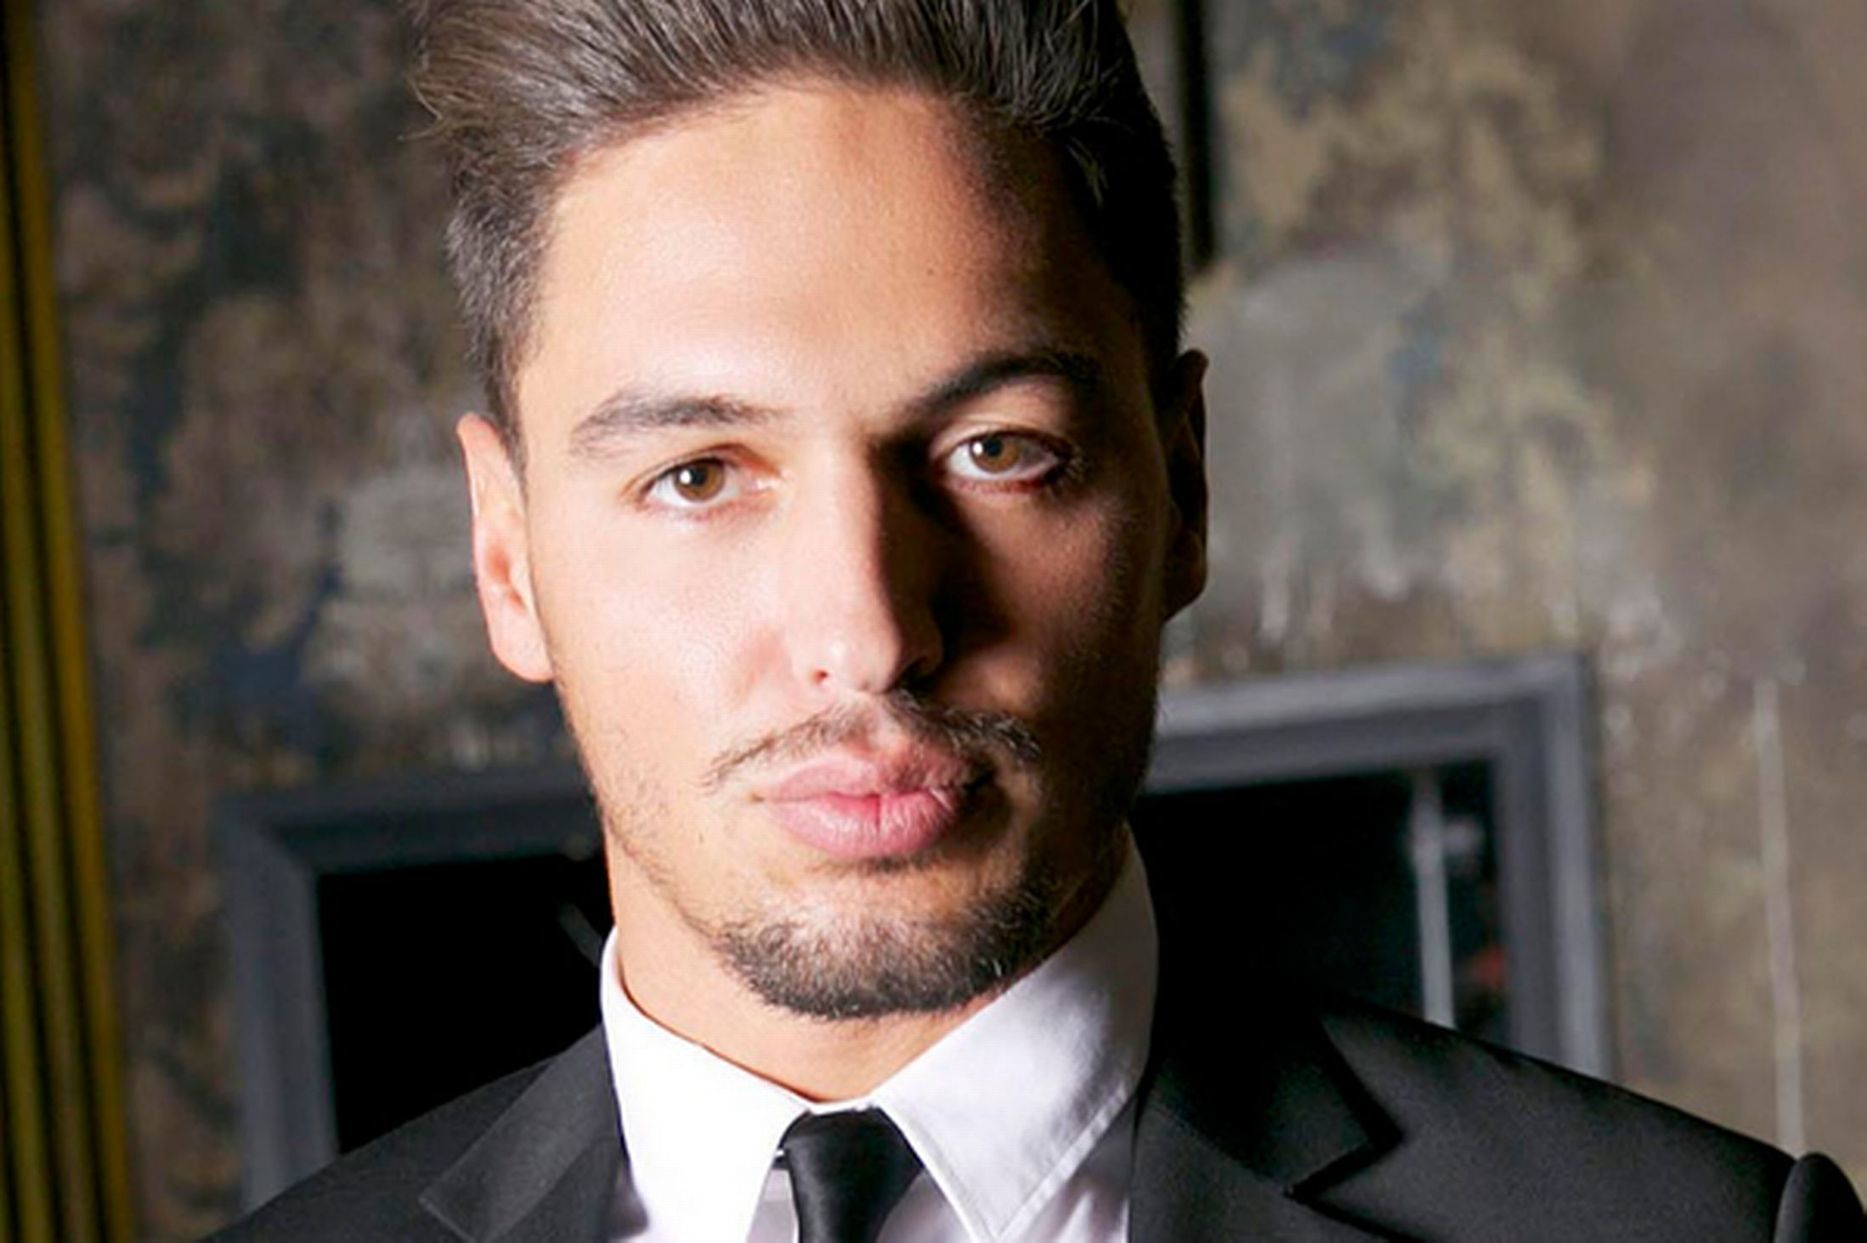 Mario Falcone profiled: TOWIE star revealed as Celebrity Big Brother 2013 ....